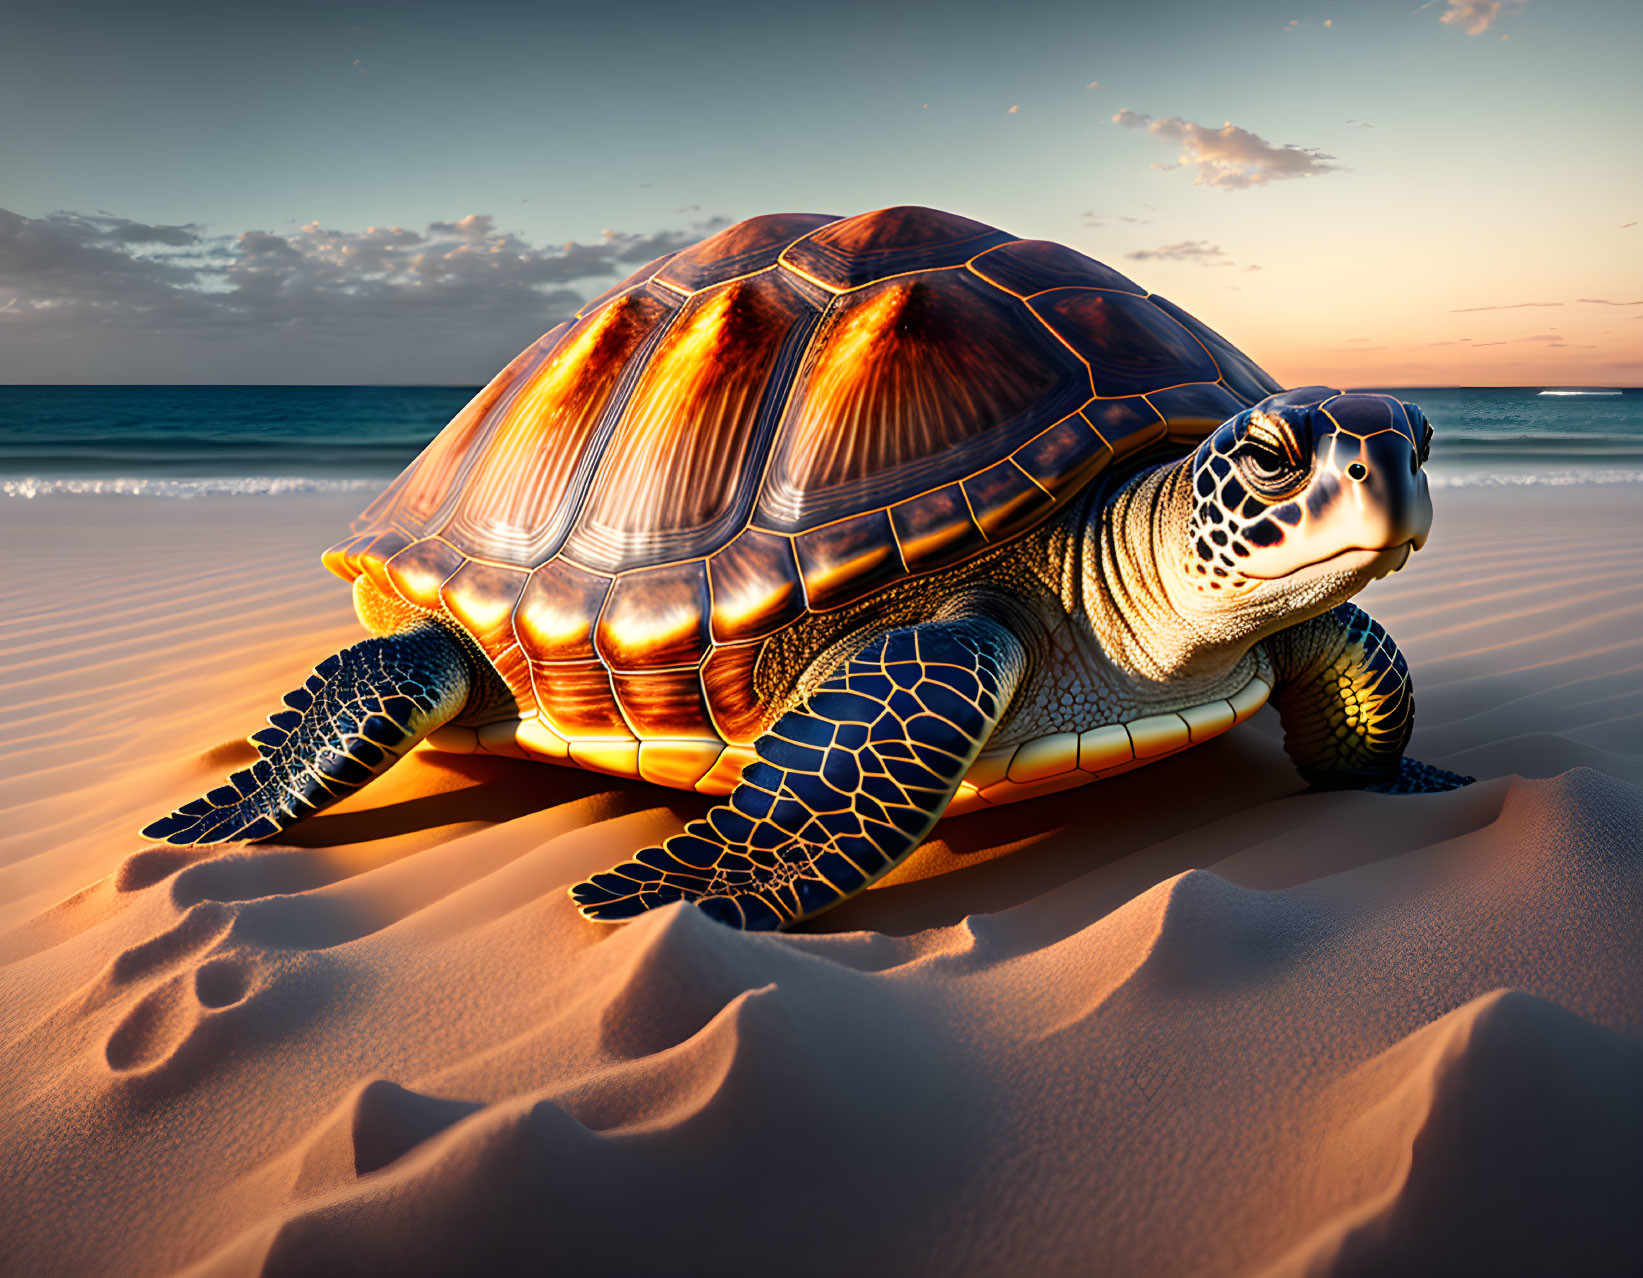 Turtle by the sea